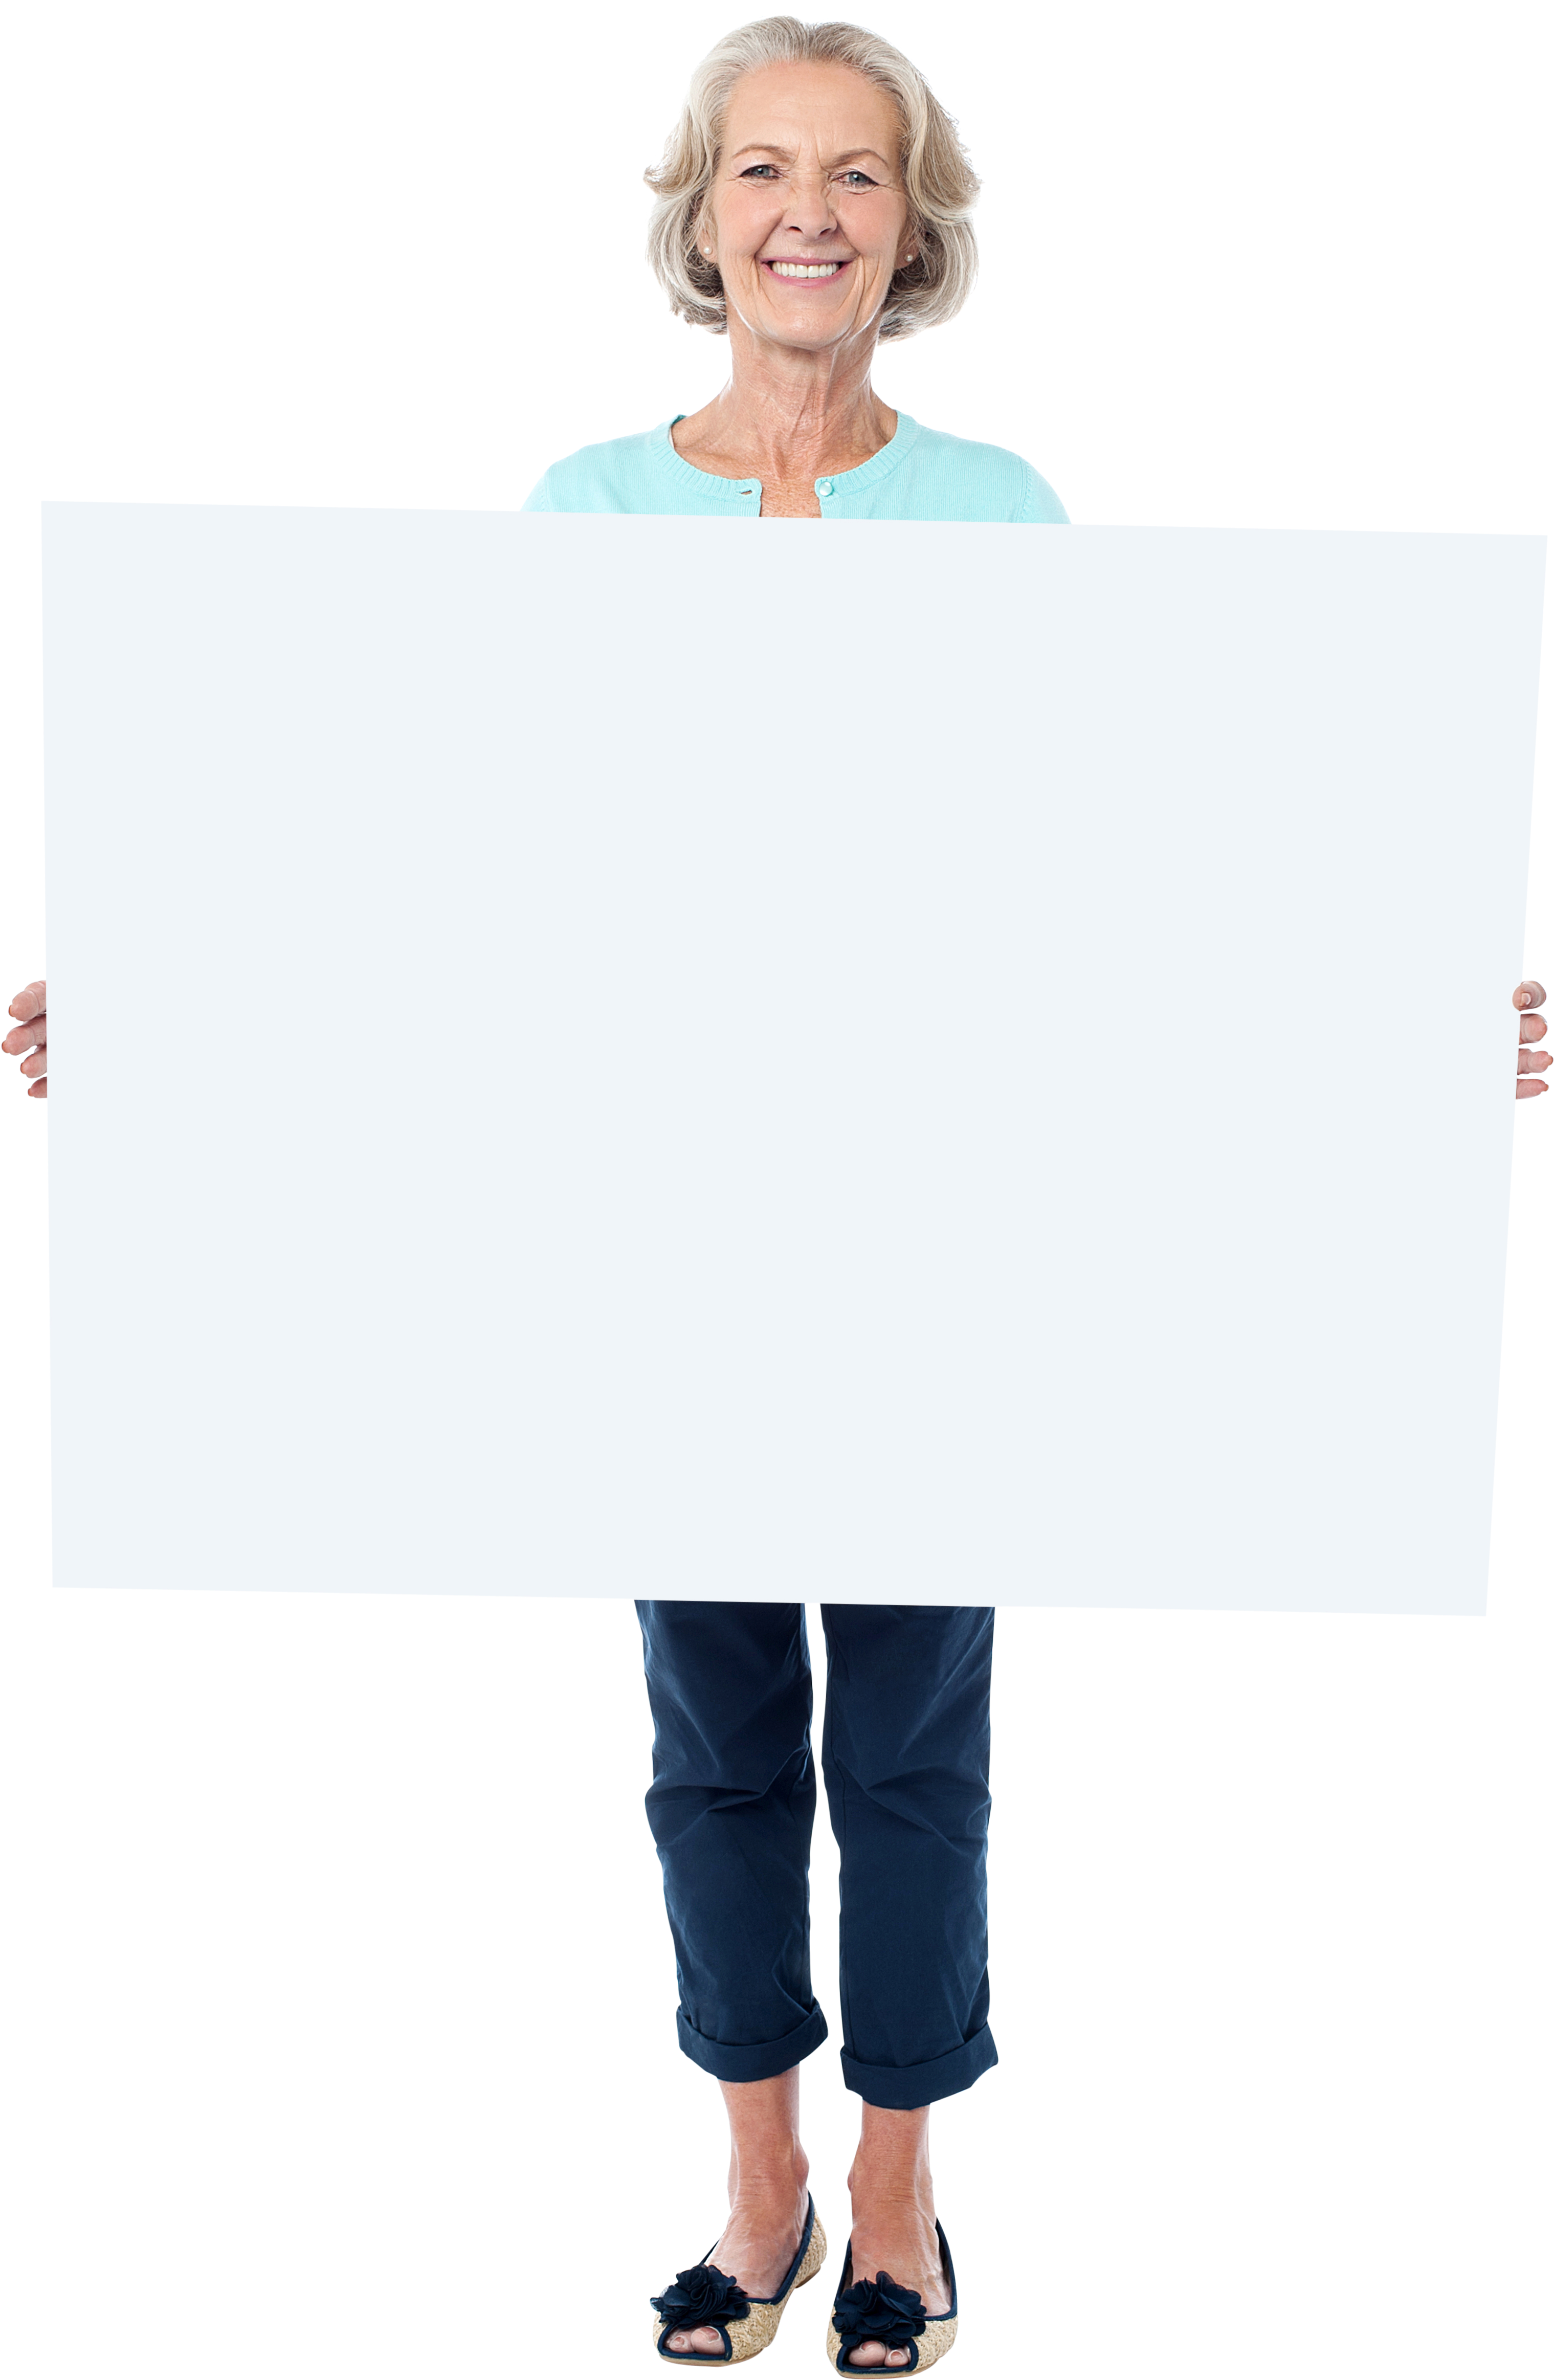 Old Women Holding Banner Png Image - Woman Holding Banner (3200x4809), Png Download